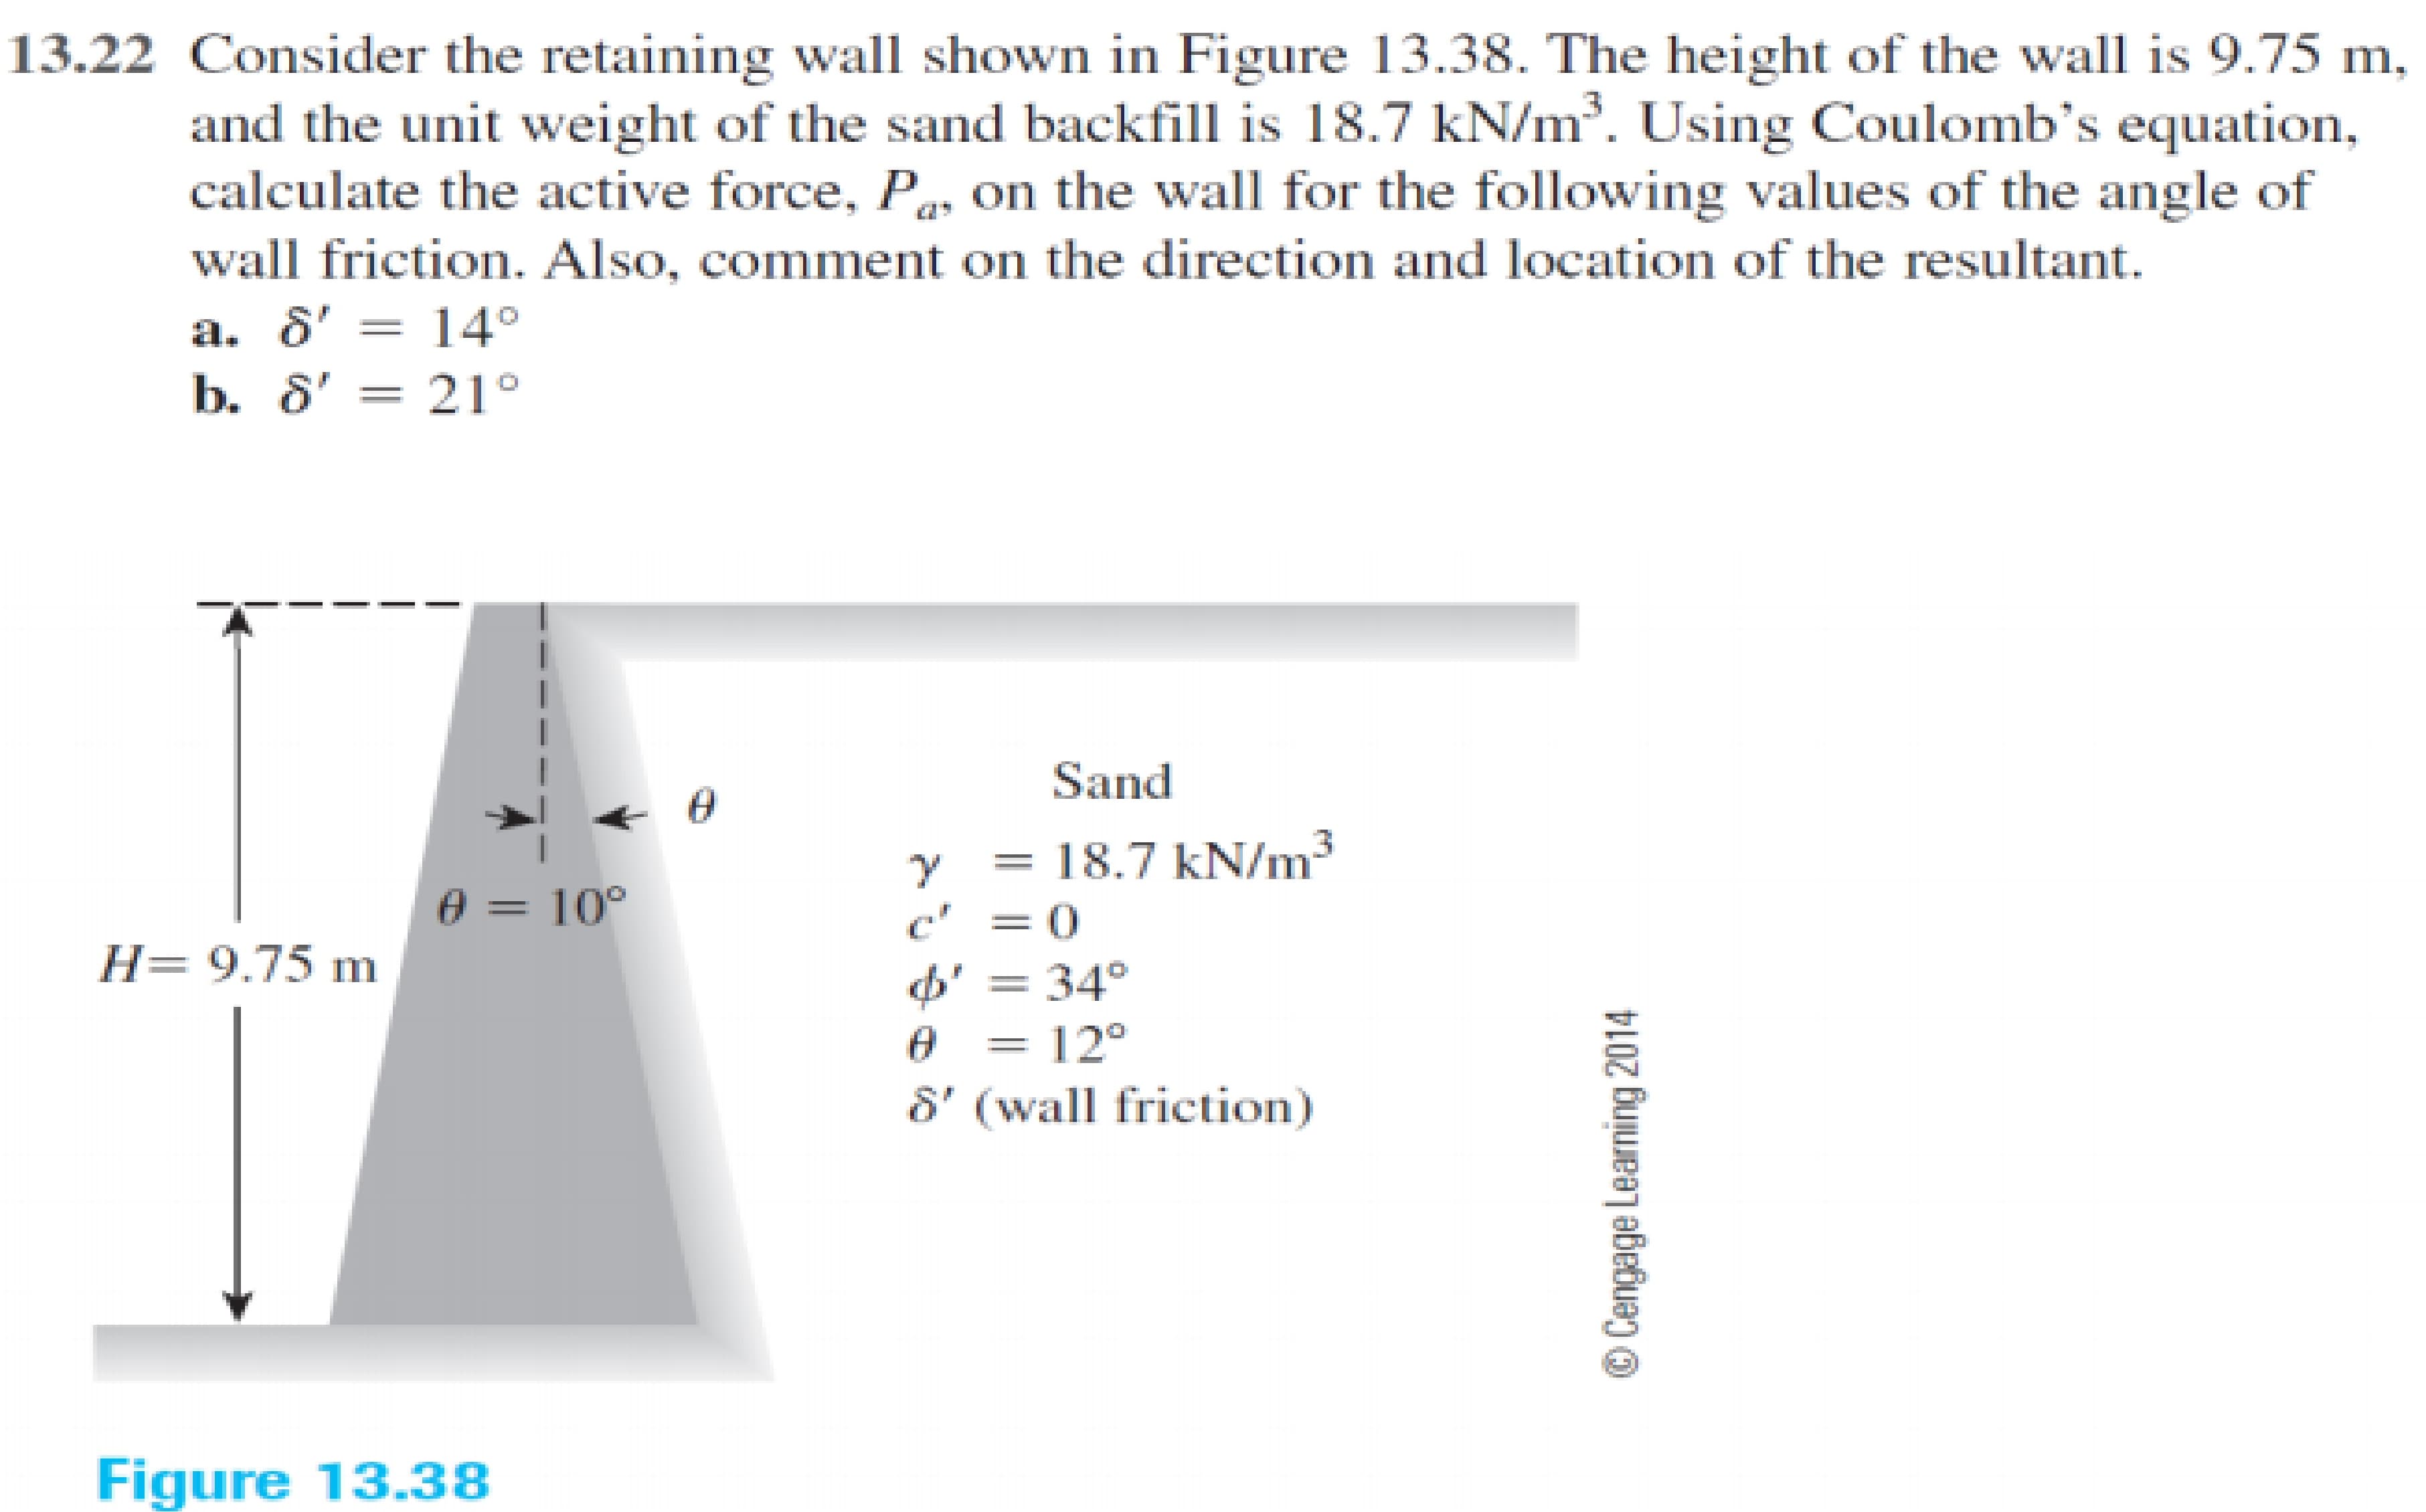 13.22 Consider the retaining wall shown in Figure 13.38. The height of the wall is 9.75 m,
and the unit weight of the sand backfill is 18.7 kN/m. Using Coulomb's equation,
calculate the active force, P, on the wall for the following values of the angle of
wall friction. Also, comment on the direction and location of the resultant.
a. 8' = 14°
b. 8' = 21°
Sand
= 18.7 kN/m3
c' =0
= 34°
e = 10°
%3D
H= 9.75 m
= 12°
8' (wall friction)
Figure 13.38
© Cengage Learning 2014
|
|
